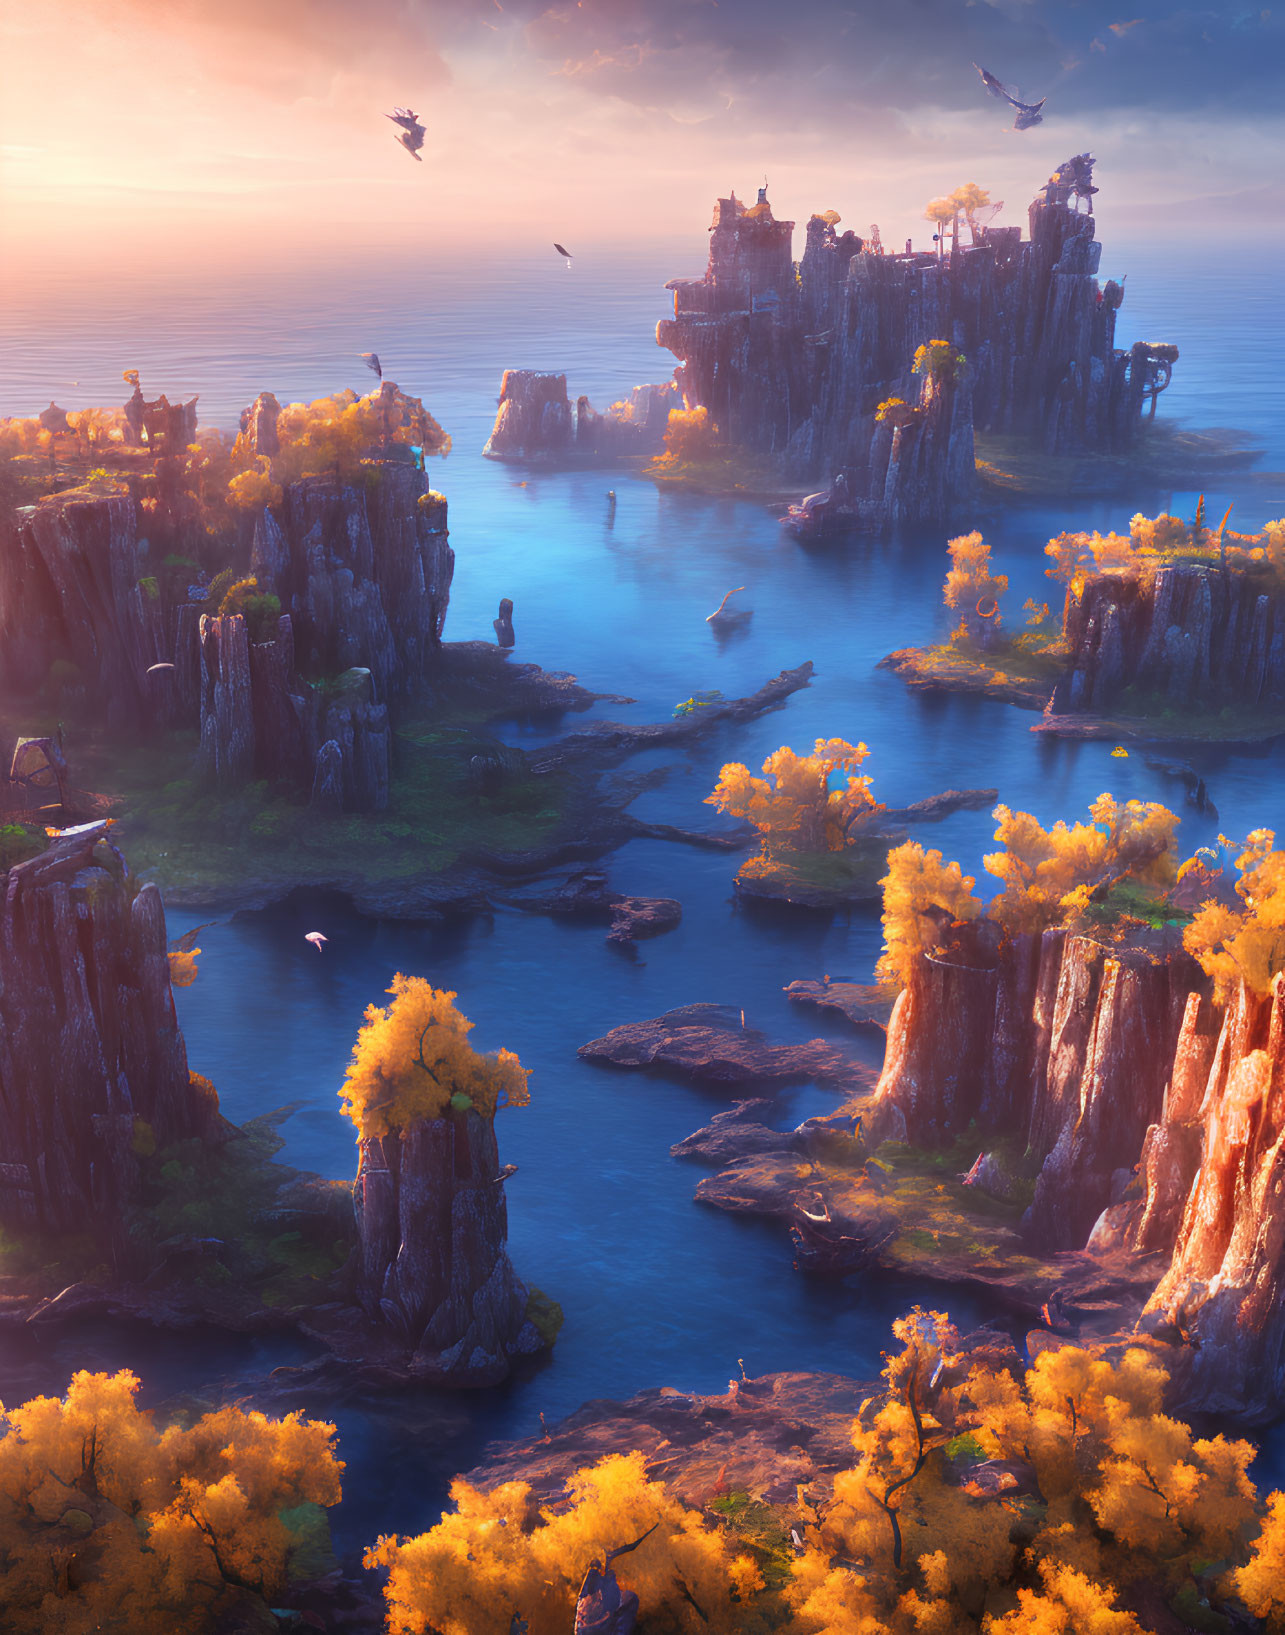 Fantasy landscape with rocky cliffs, river, autumn trees, castle, and birds under warm sky